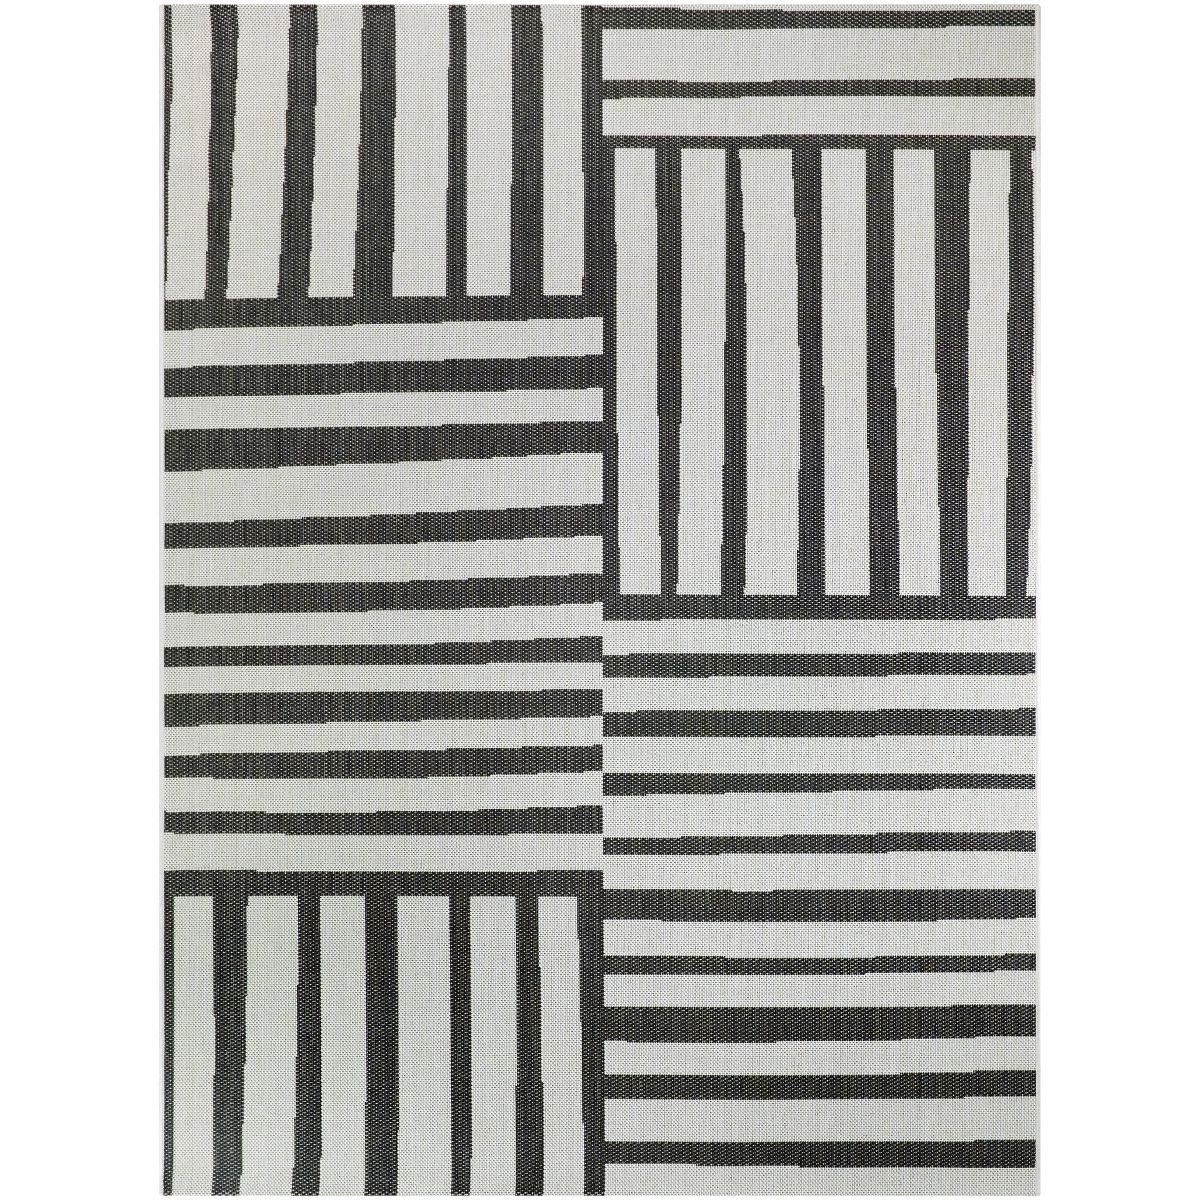 7'x10' Mod Directional Lines Outdoor Rug Black - Project 62™ | Target